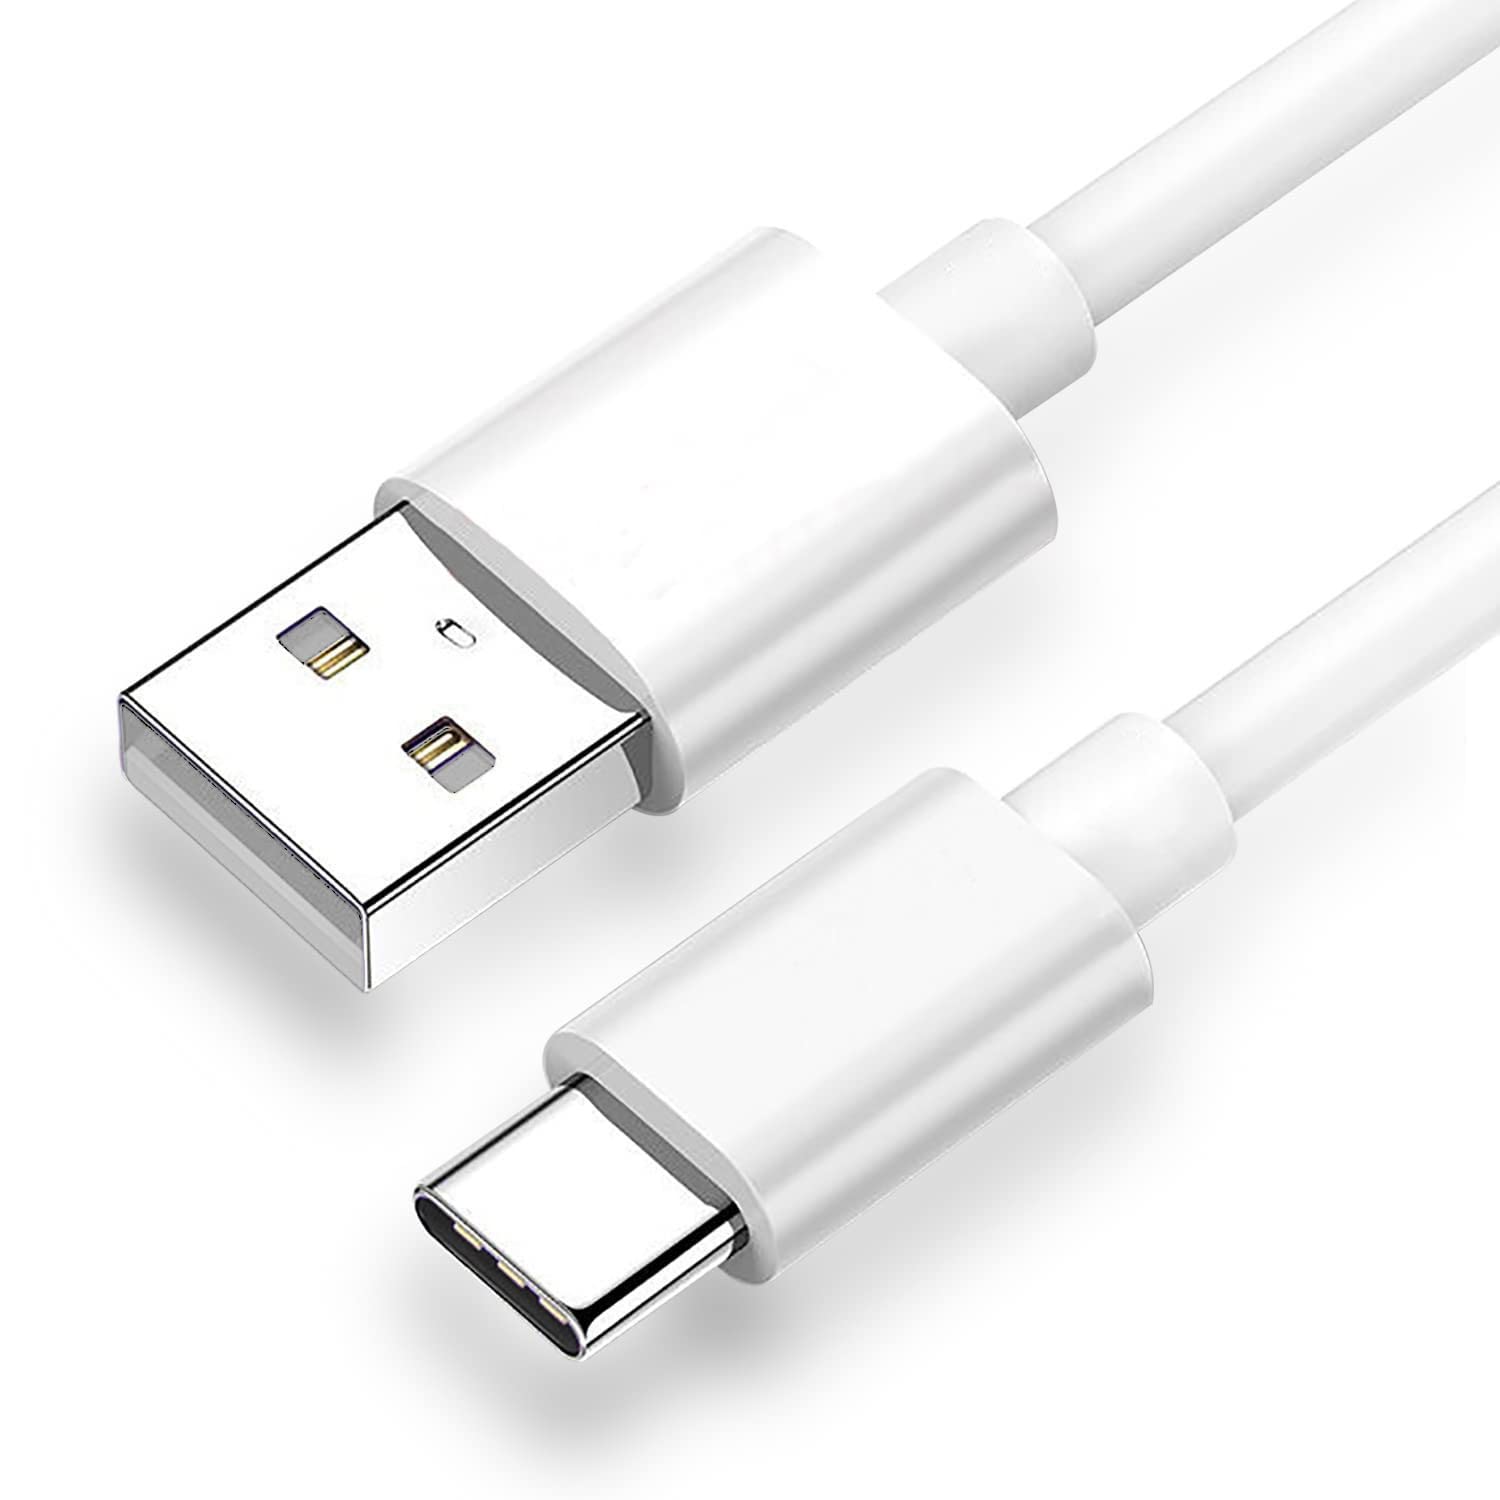 Vivo V27e FlashCharge 2.0 Original Type C Cable And Data Sync Cord-White